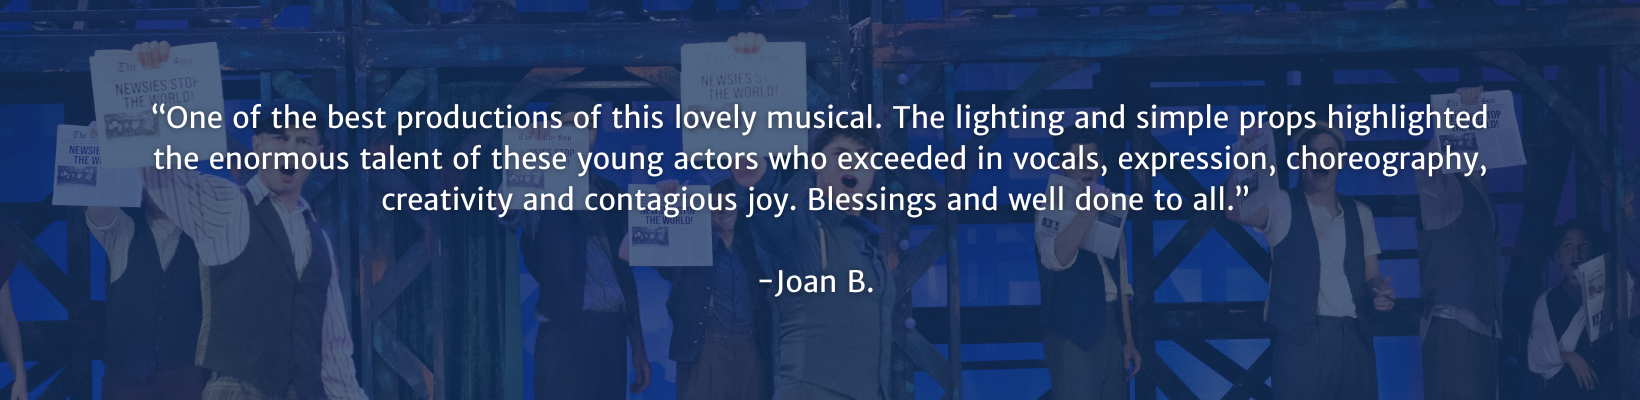 Servant Stage Review_Joan B.